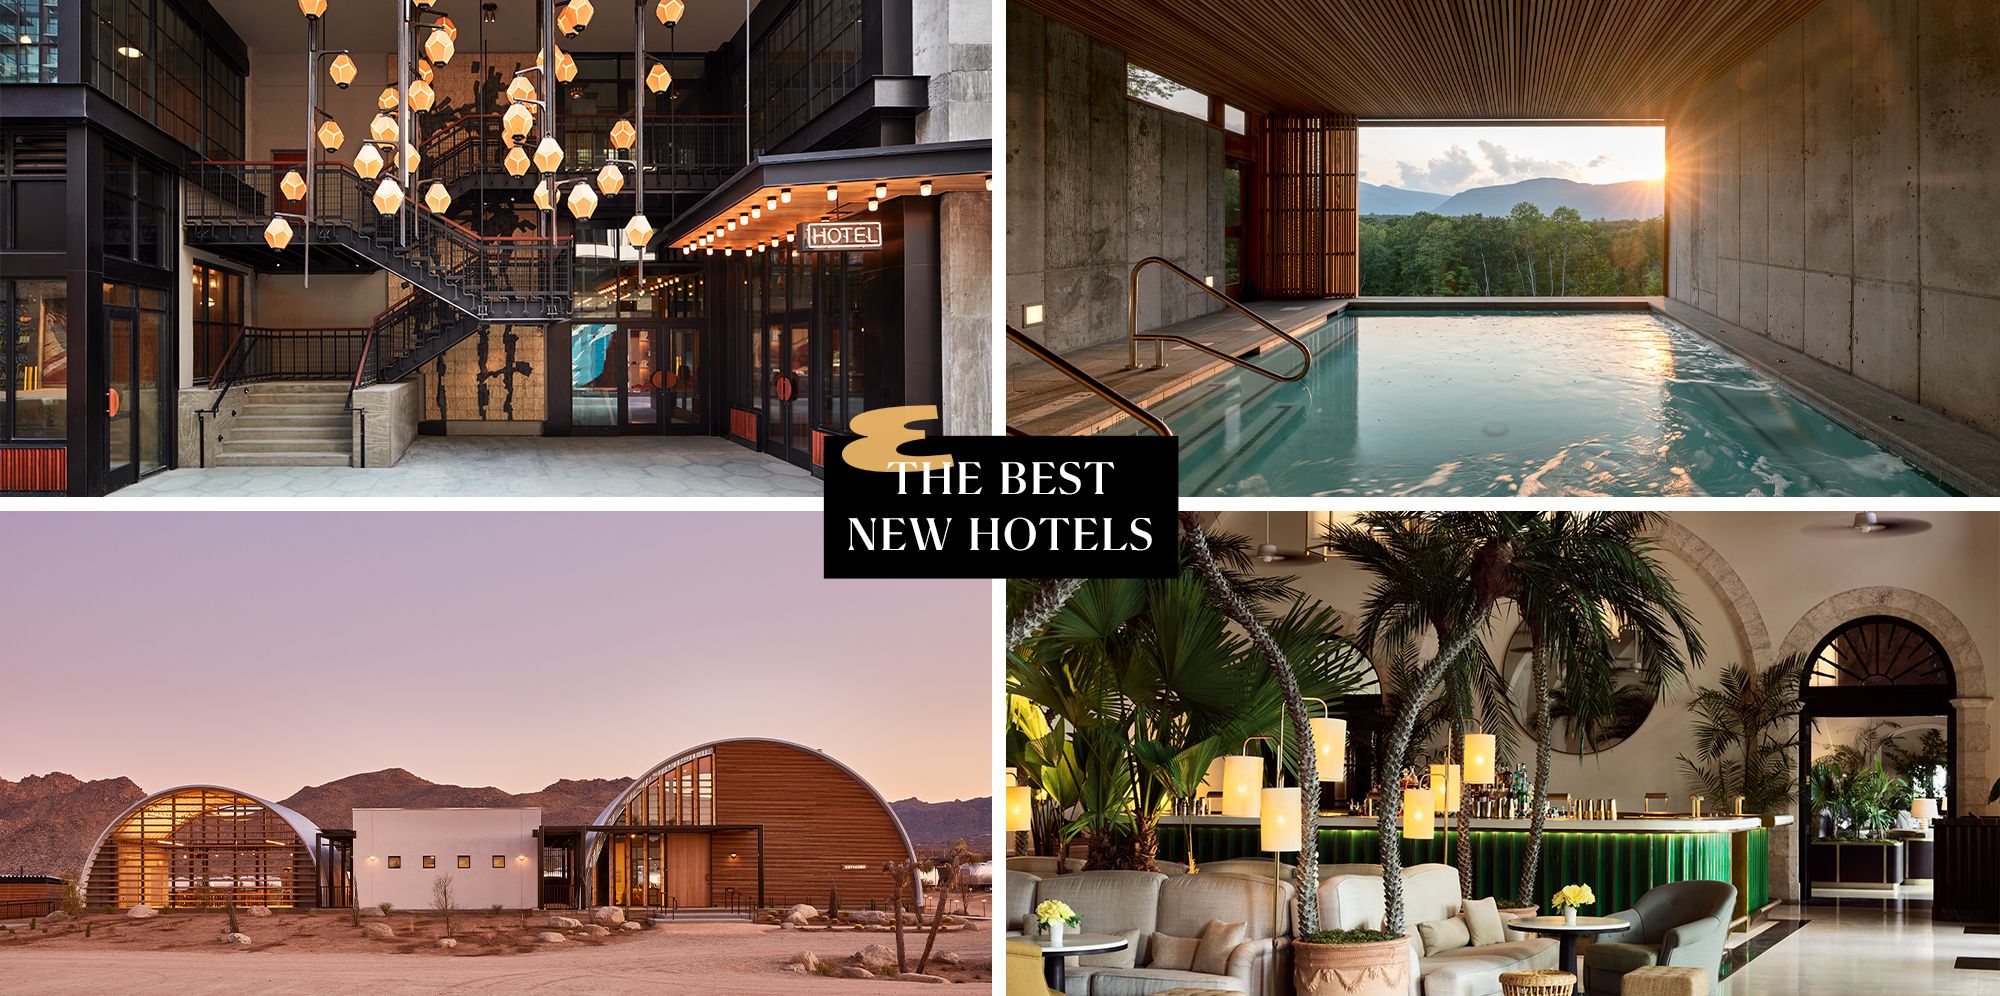 The Best New Hotels in North America and the Caribbean, 2022 pic